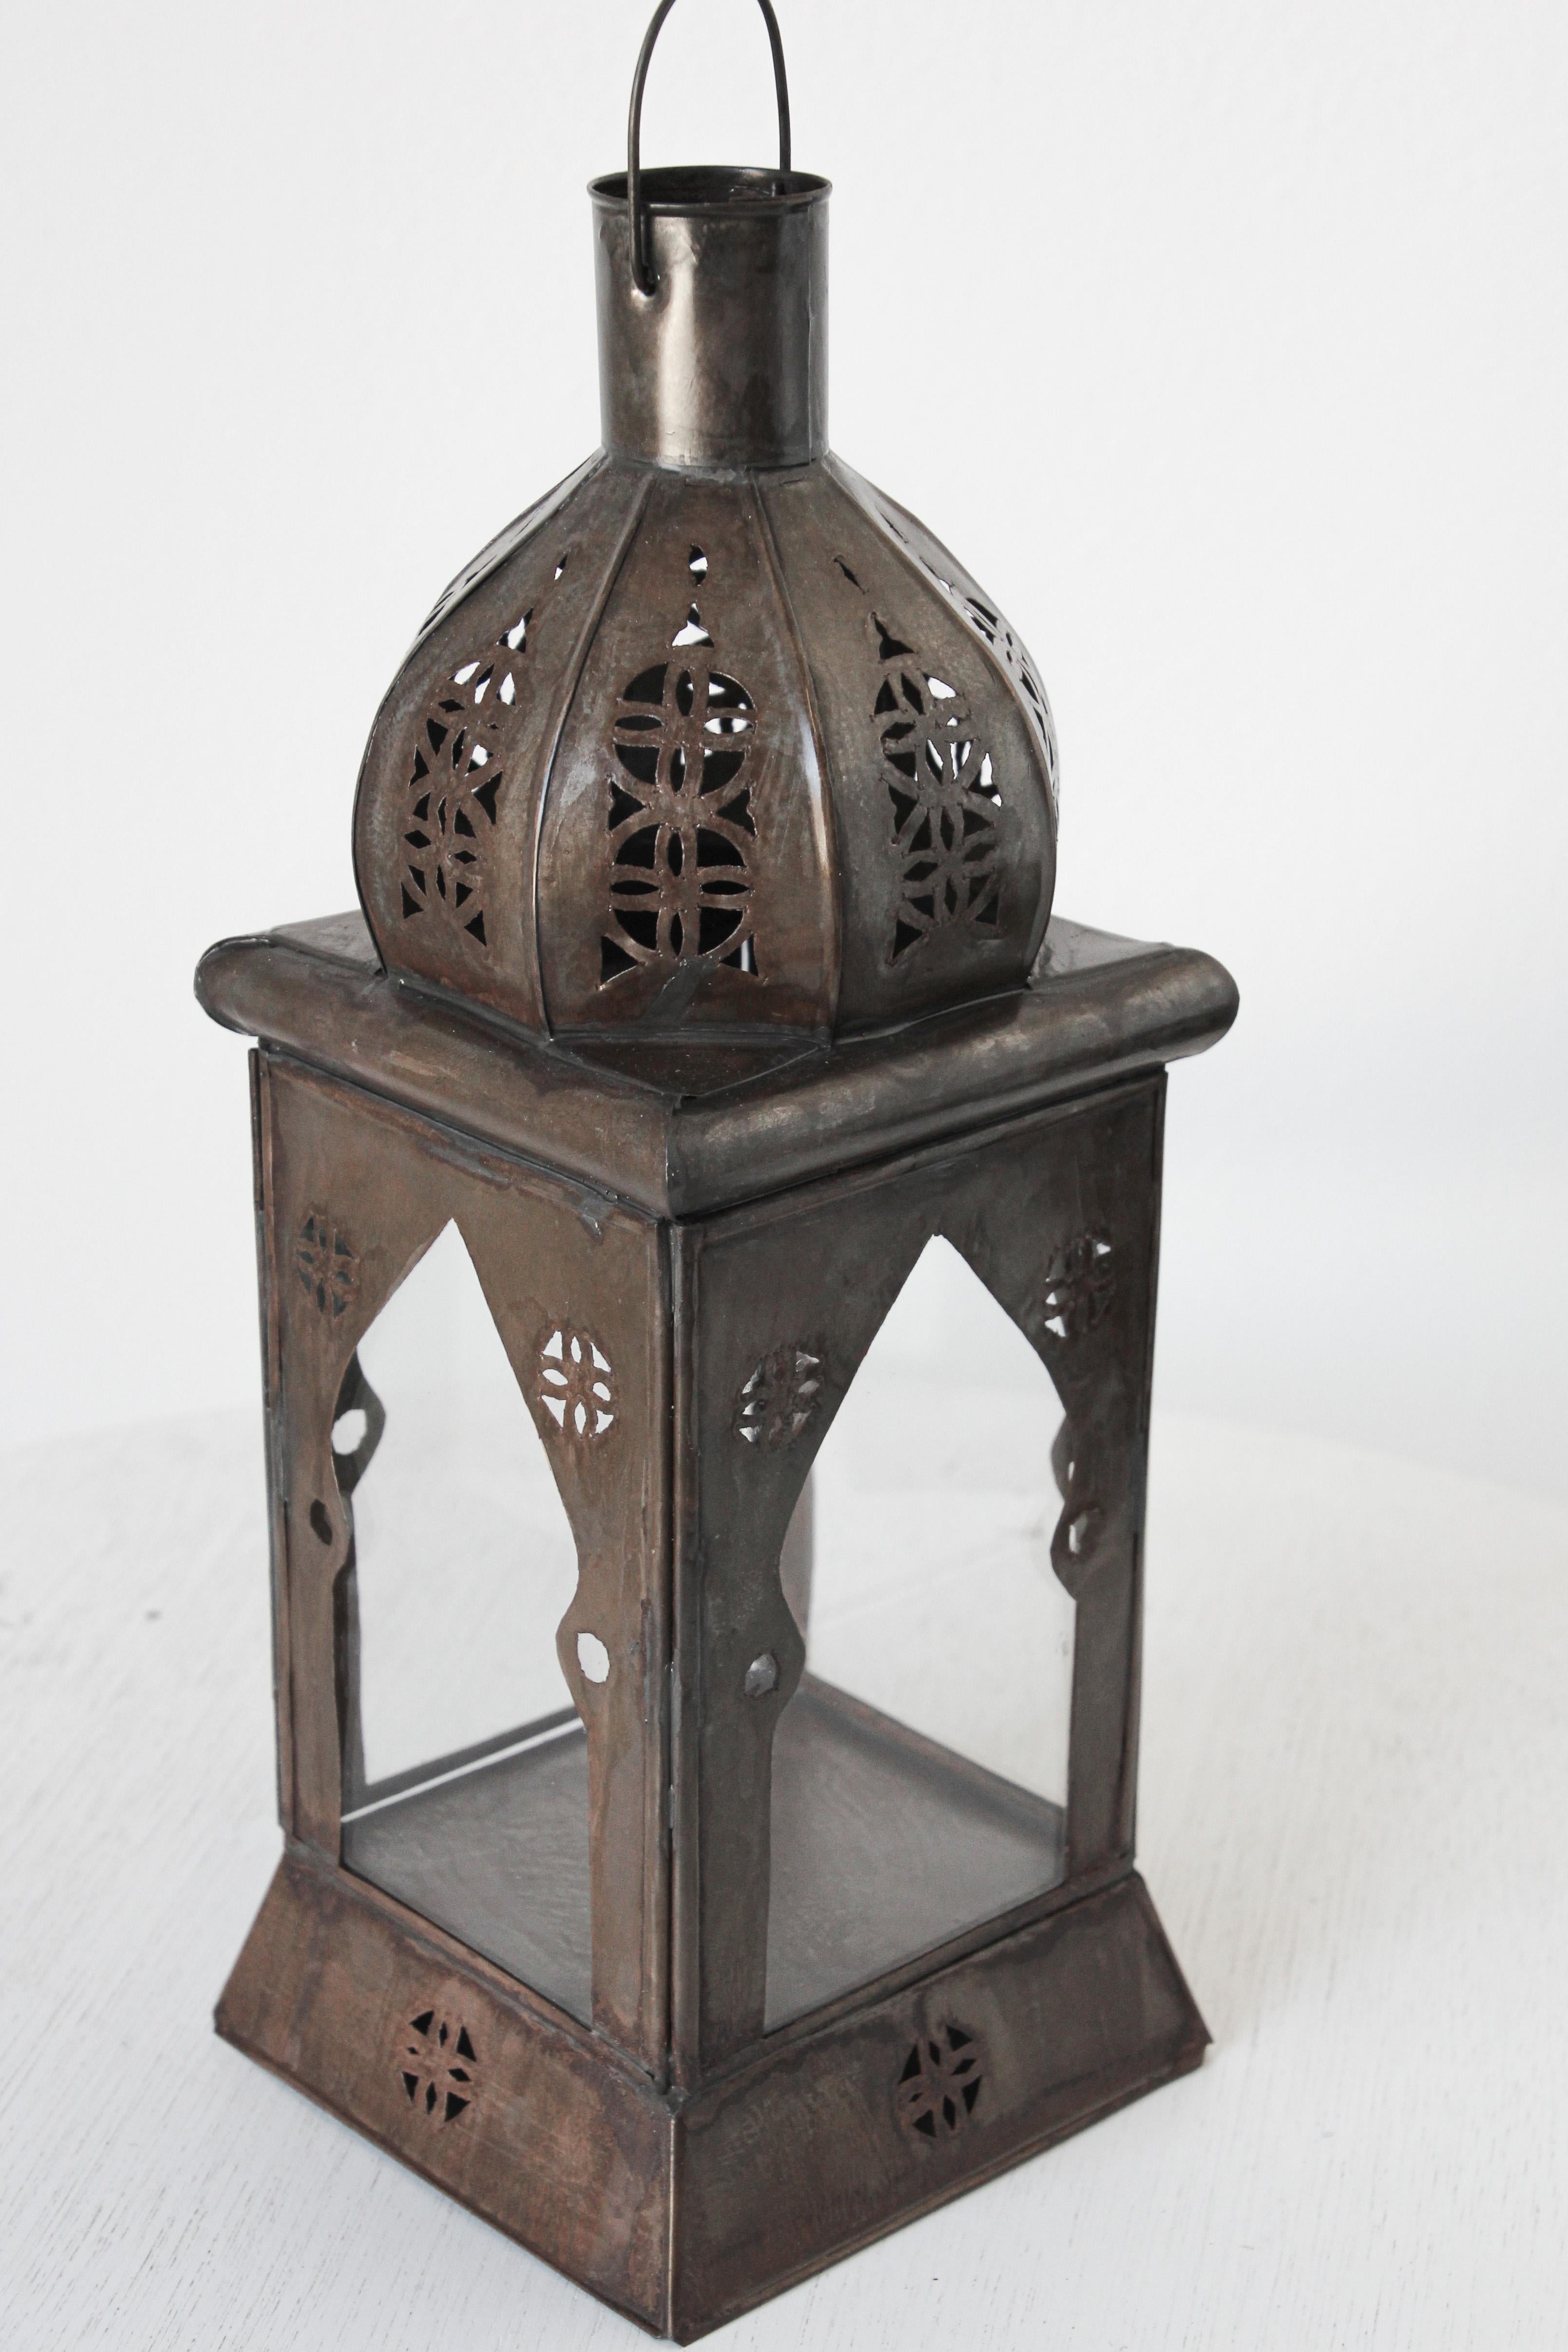 Small handcrafted Moroccan clear glass lantern adorned with open metal work Moorish filigree design.
Hurricane tole candle lamp with open metal work design and clear glass.
For indoor or covered area use only.
Many of our customers place oil candles